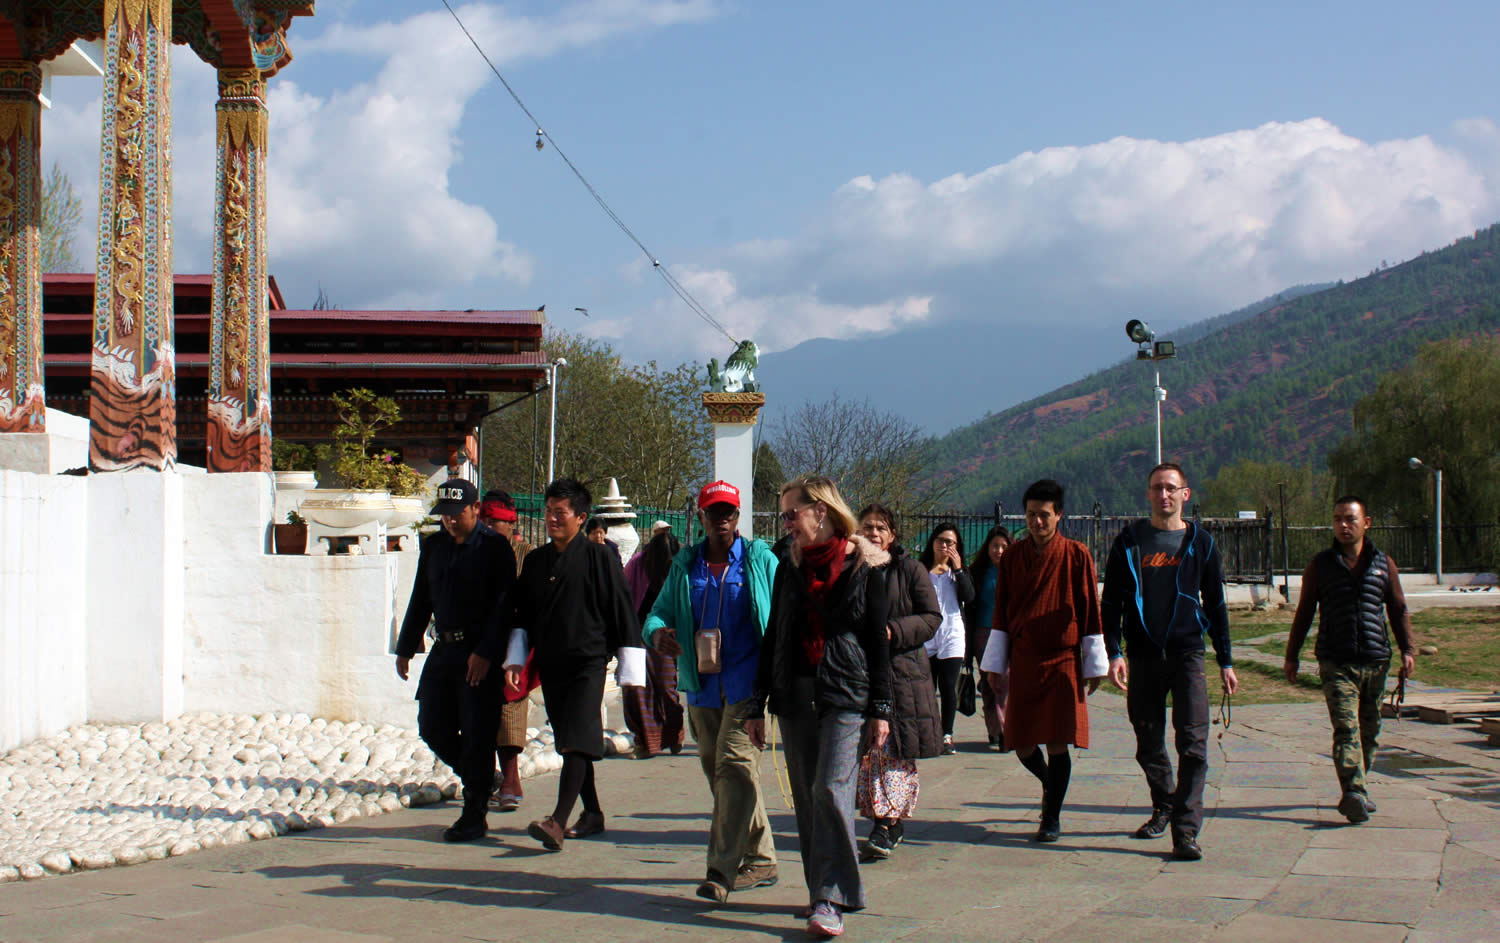 Group members join the locals in circumambulating the chorten.